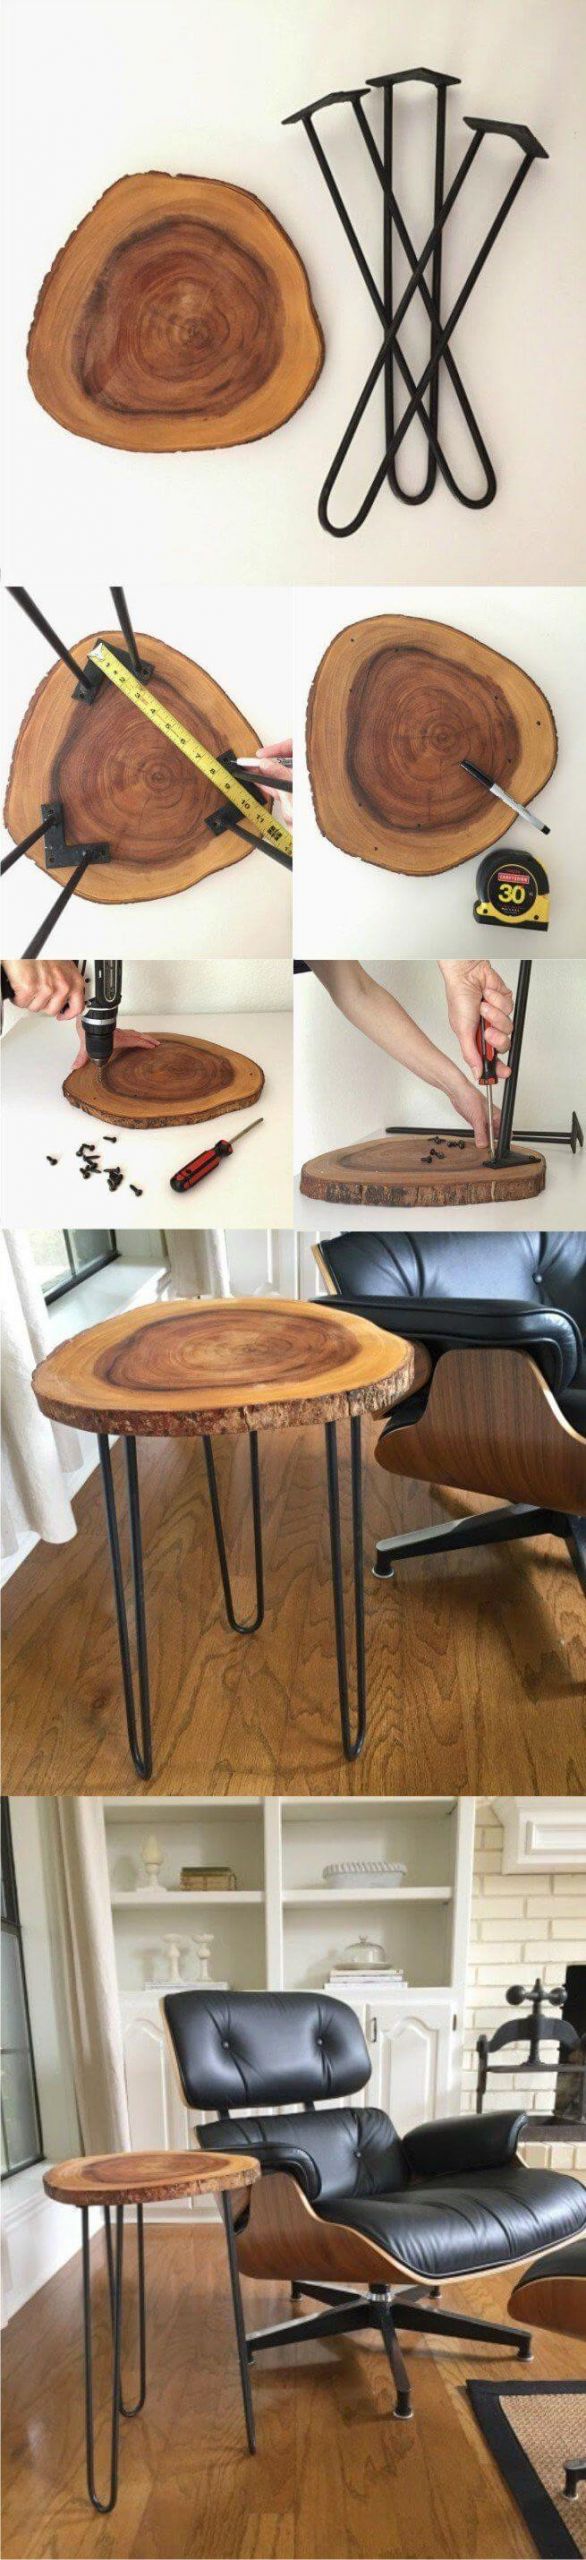 DIY Wood Craft
 32 Best DIY Wood Craft Projects Ideas and Designs for 2019